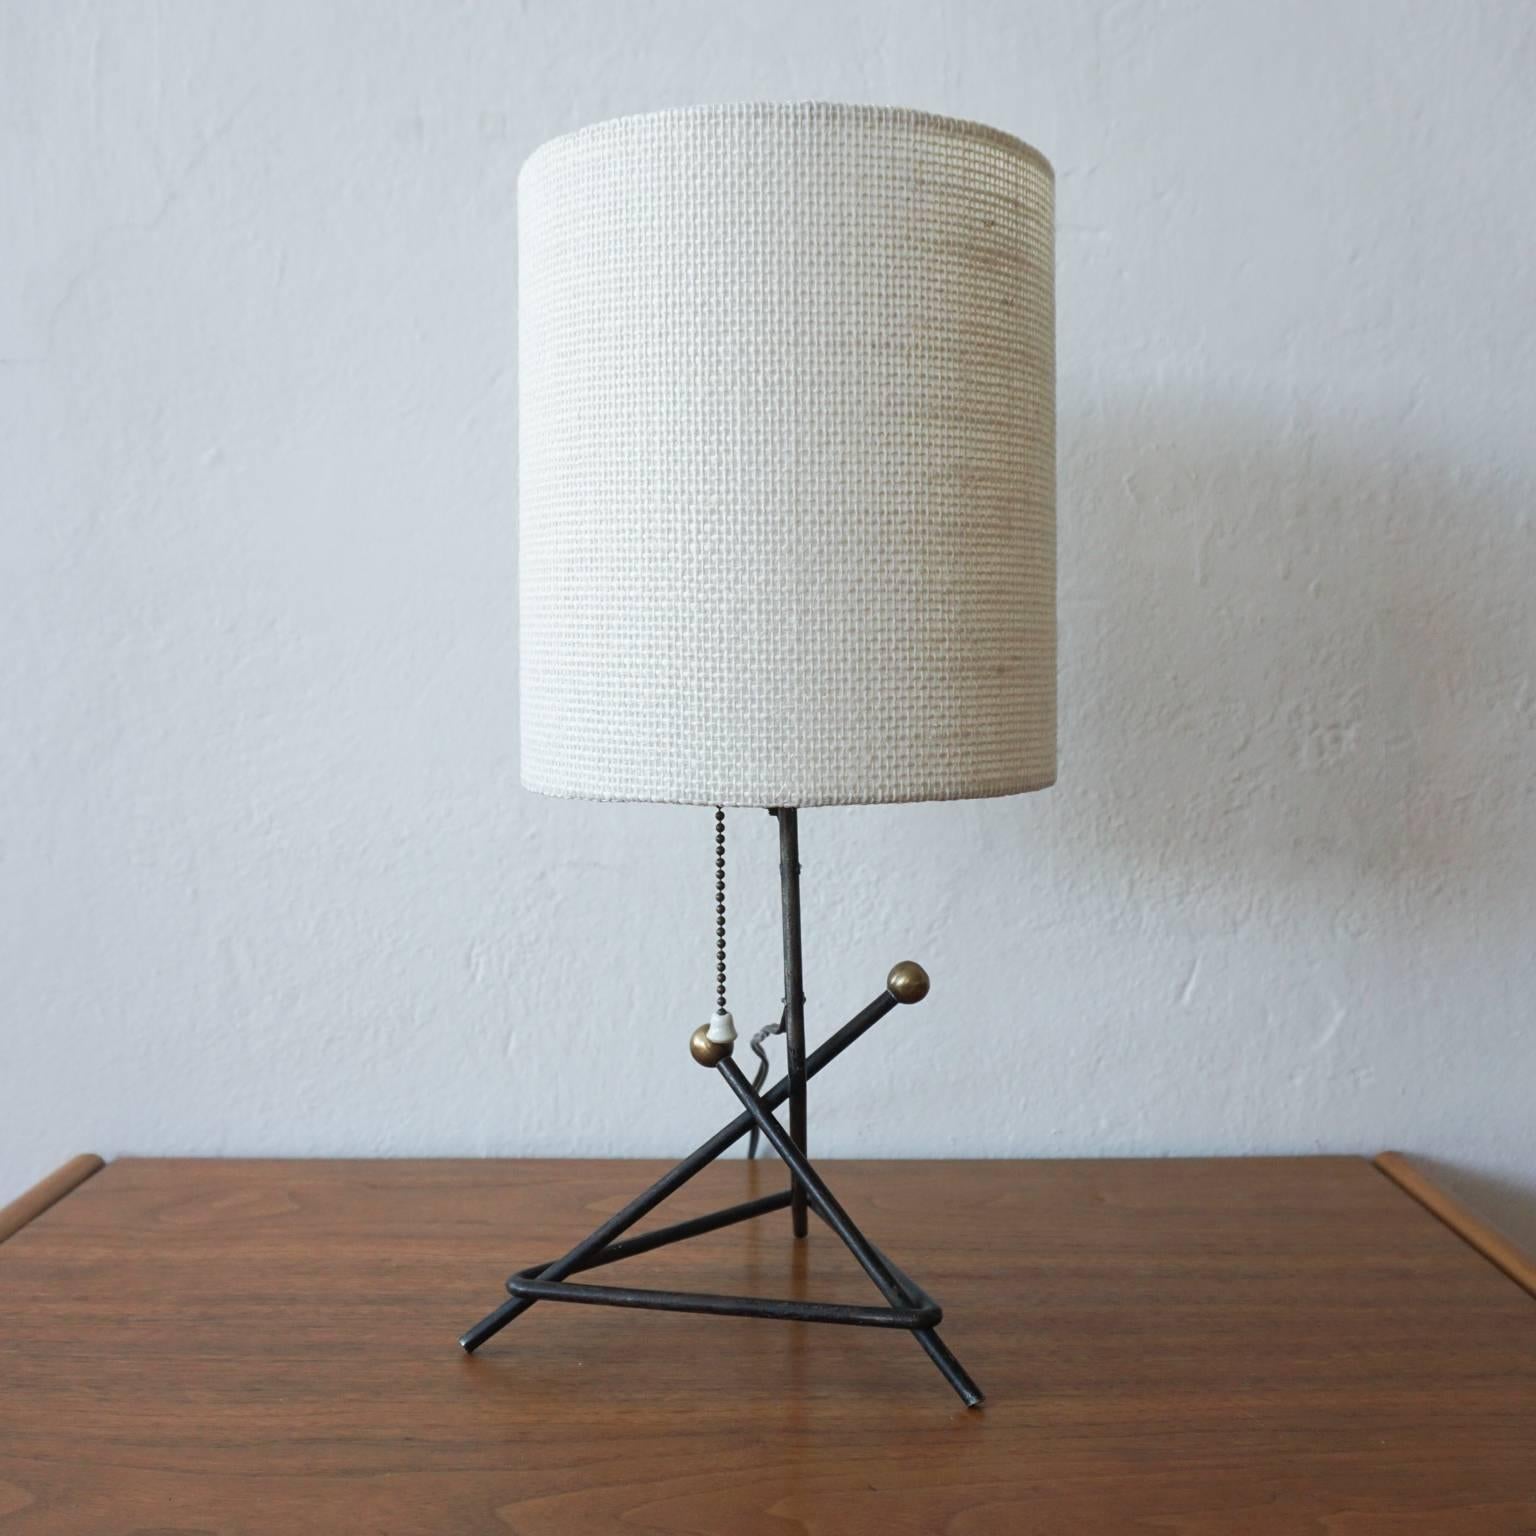 1950s iron table lamp with brass elements. Original finish to the lamp, with a new shade, 1950s.

Measurements include the shade.